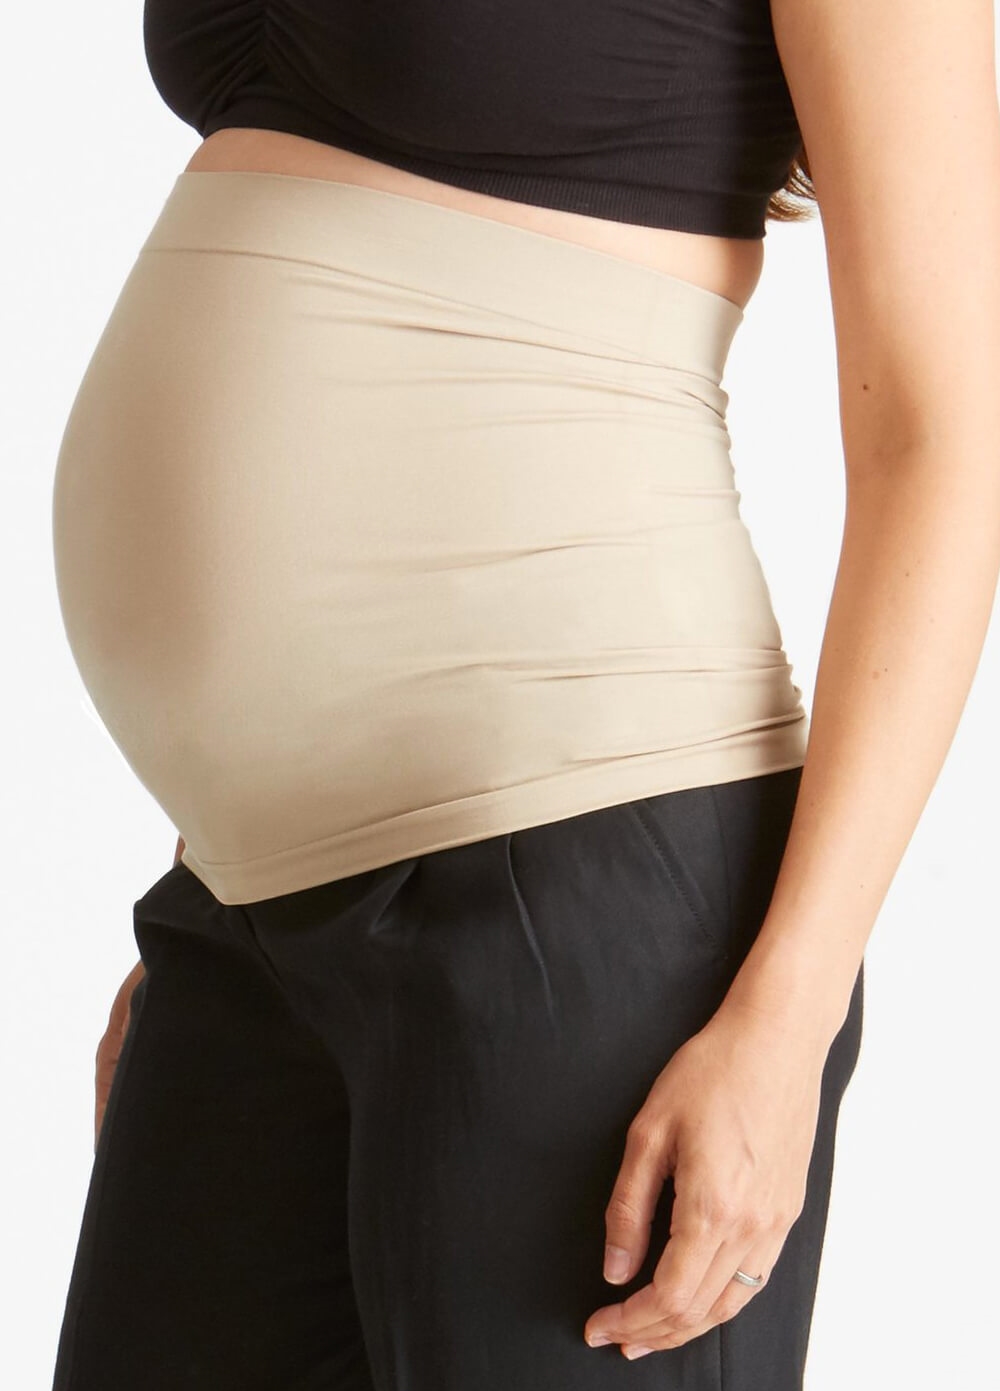 Bellaband Maternity Belly Band In Nude by Ingrid & Isabel